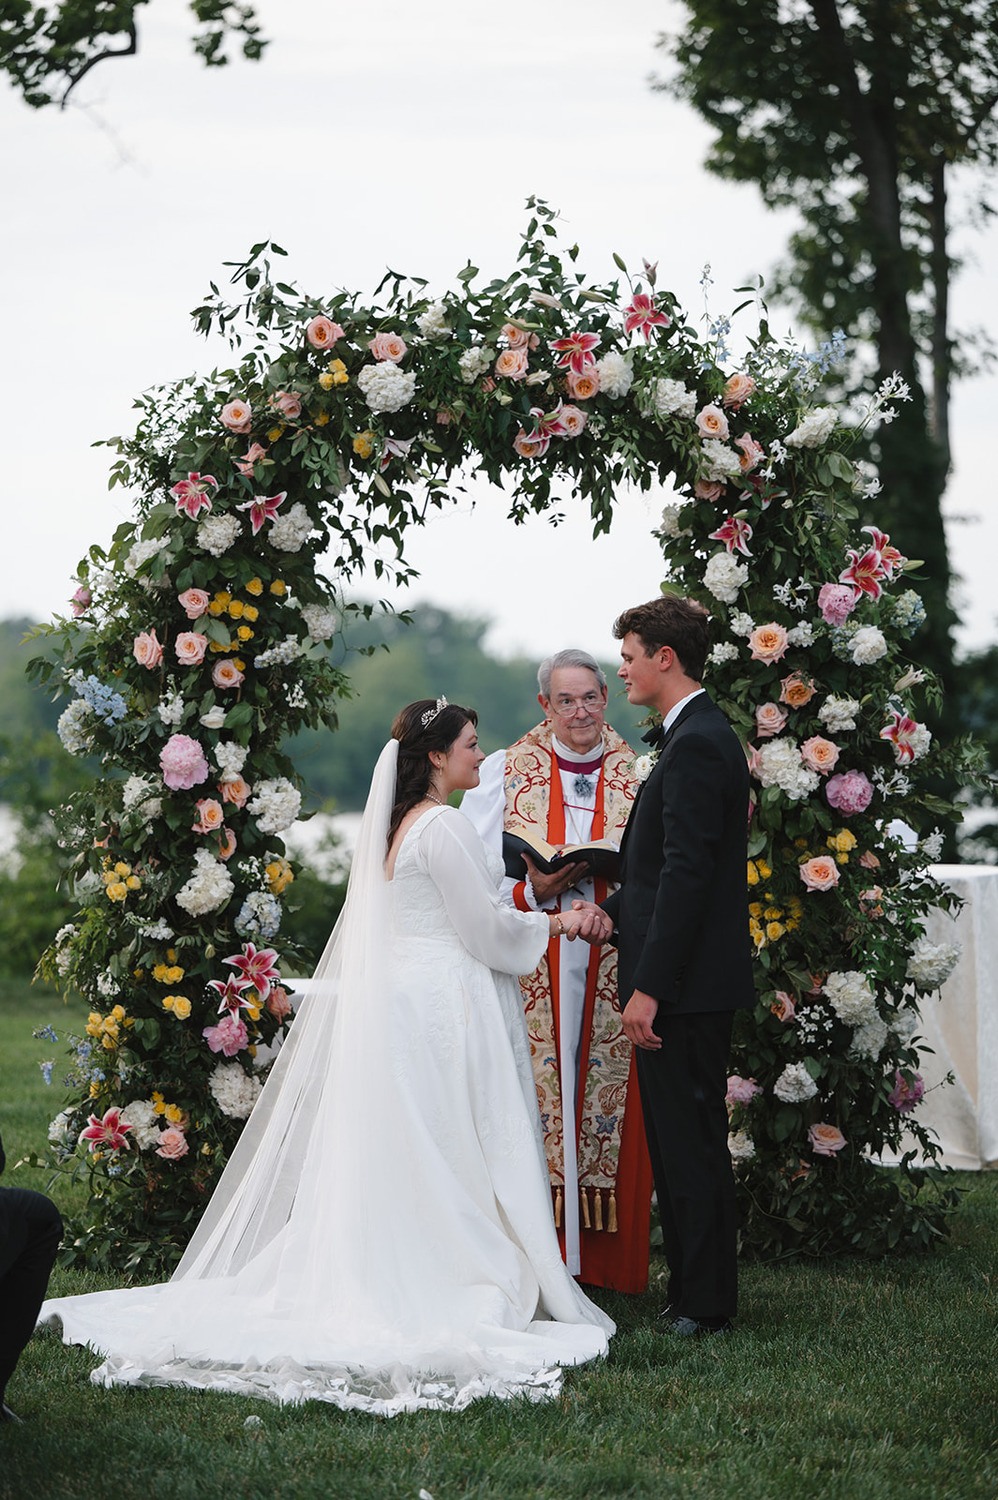 A bride and groom stand before a floral arch, holding hands and exchanging vows during their outdoor wedding ceremony, with a priest officiating the service. The arch is adorned with an abundance of colorful flowers, including roses and lilies, set against a lush, green backdrop.